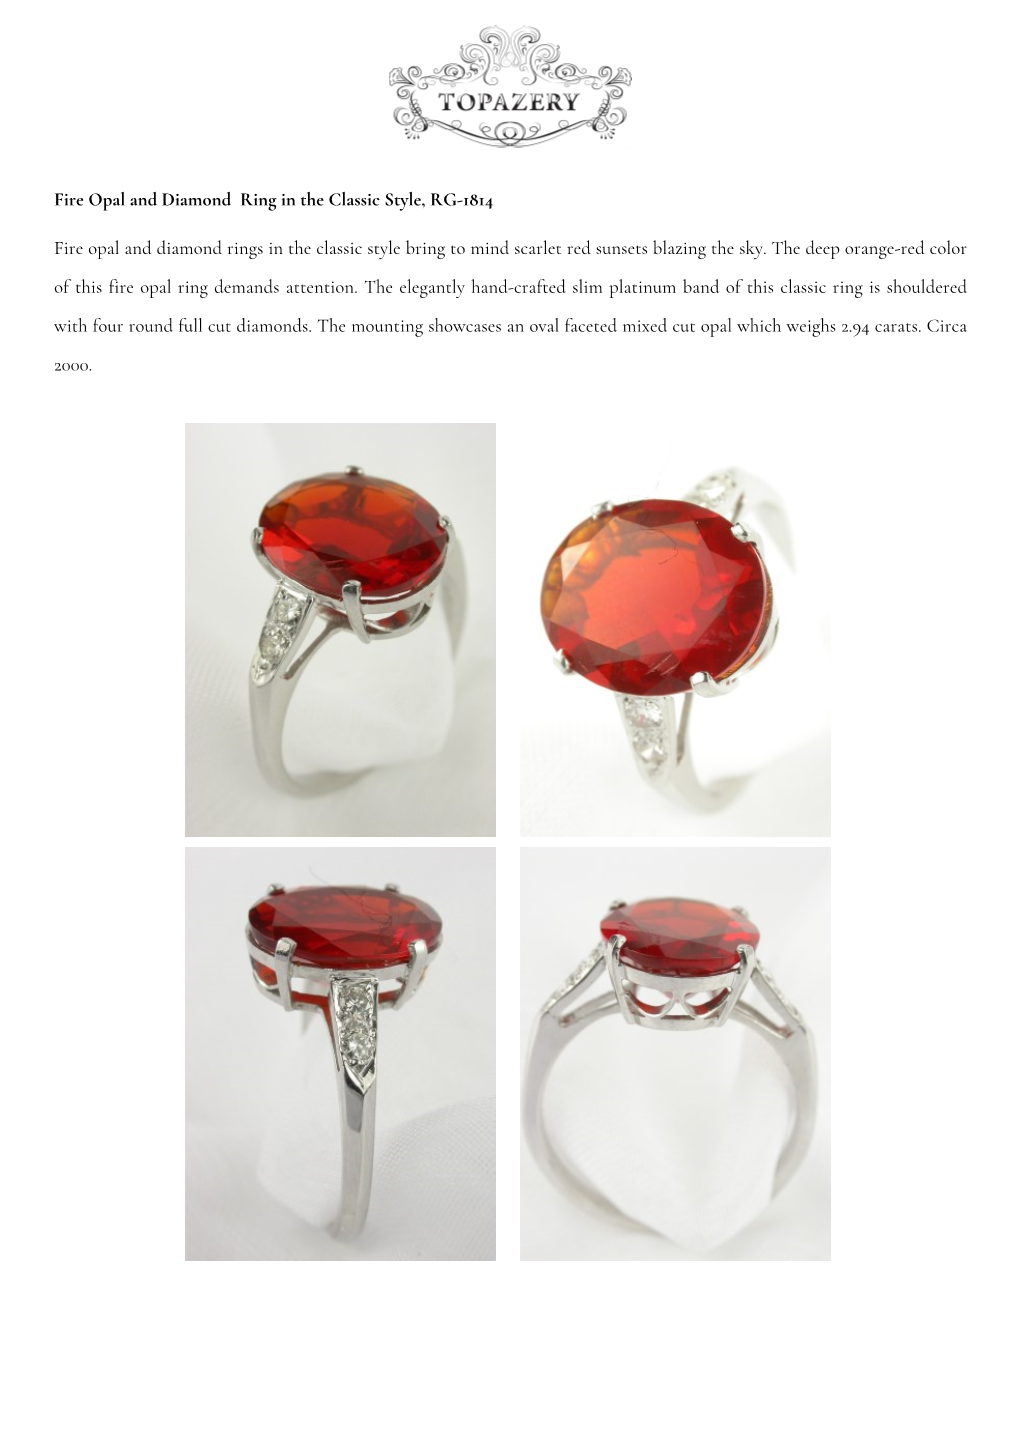 Fire Opal and Diamond Ring in the Classic Style, RG-1814 Fire Opal